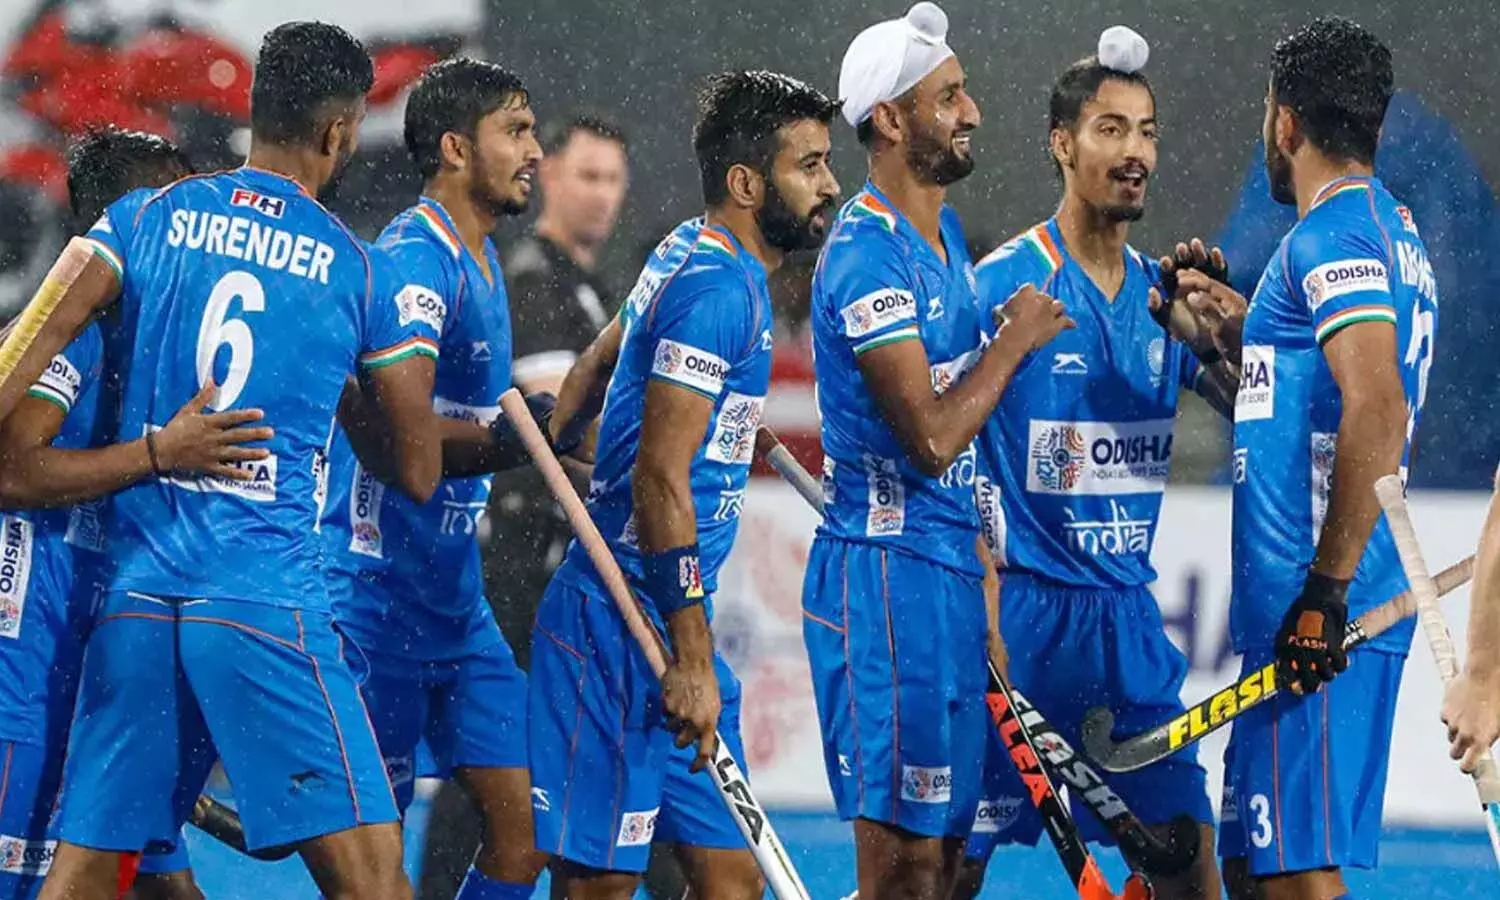 The Indian hockey team has won the bronze medal by defeating the mighty German hockey team 5-4.